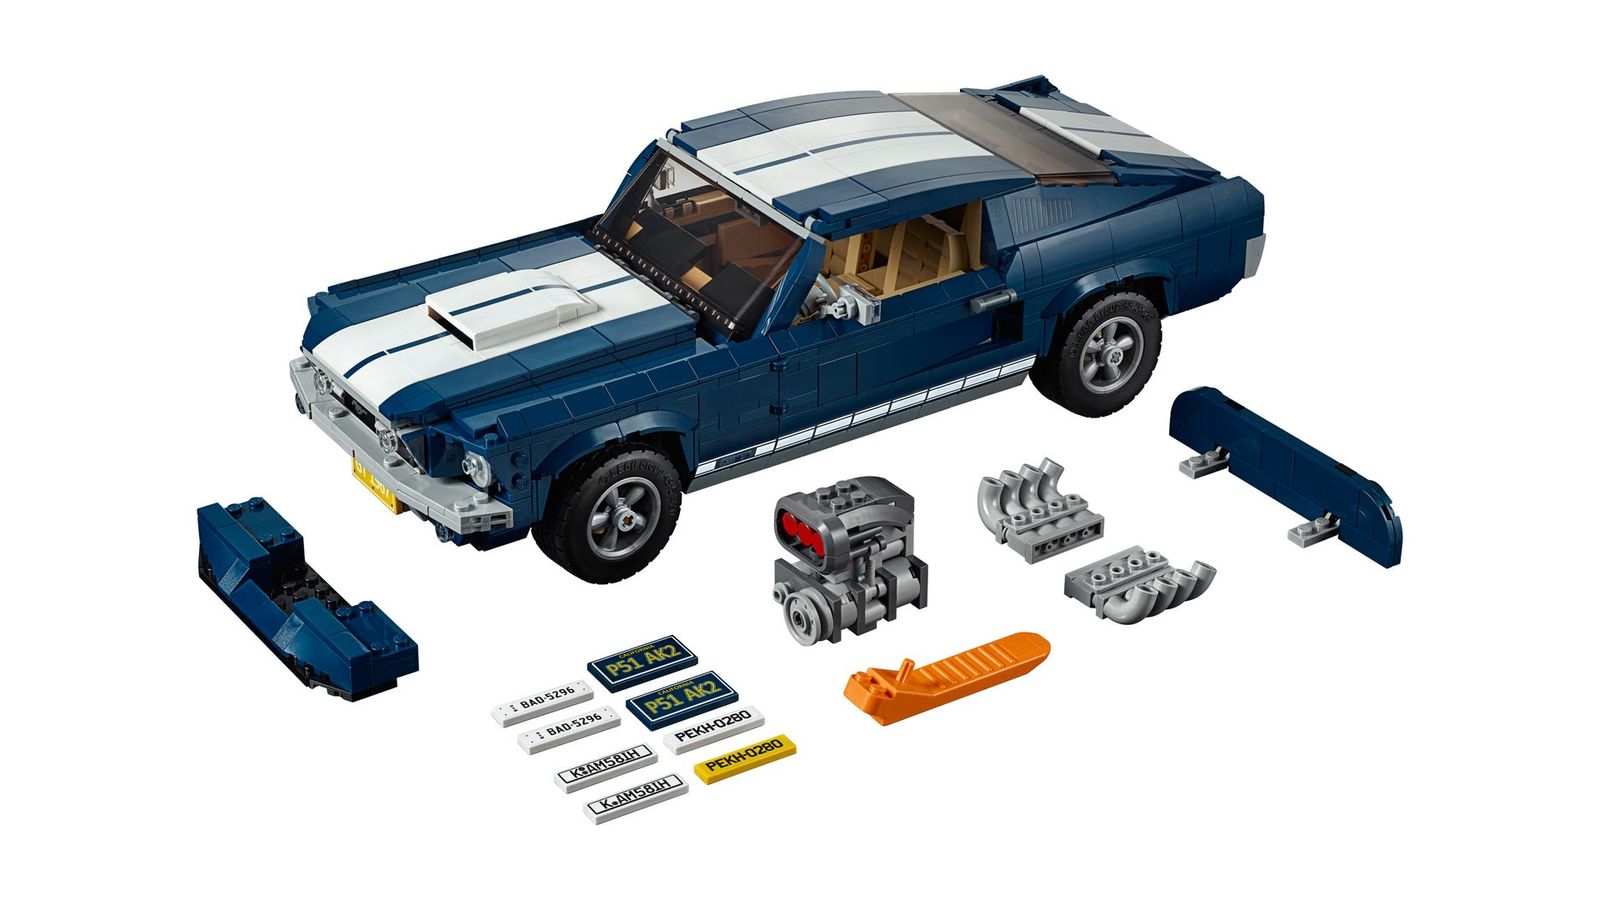 LEGO Creator Expert Ford Mustang product image of a blue Ford Mustang with white racing stripes.